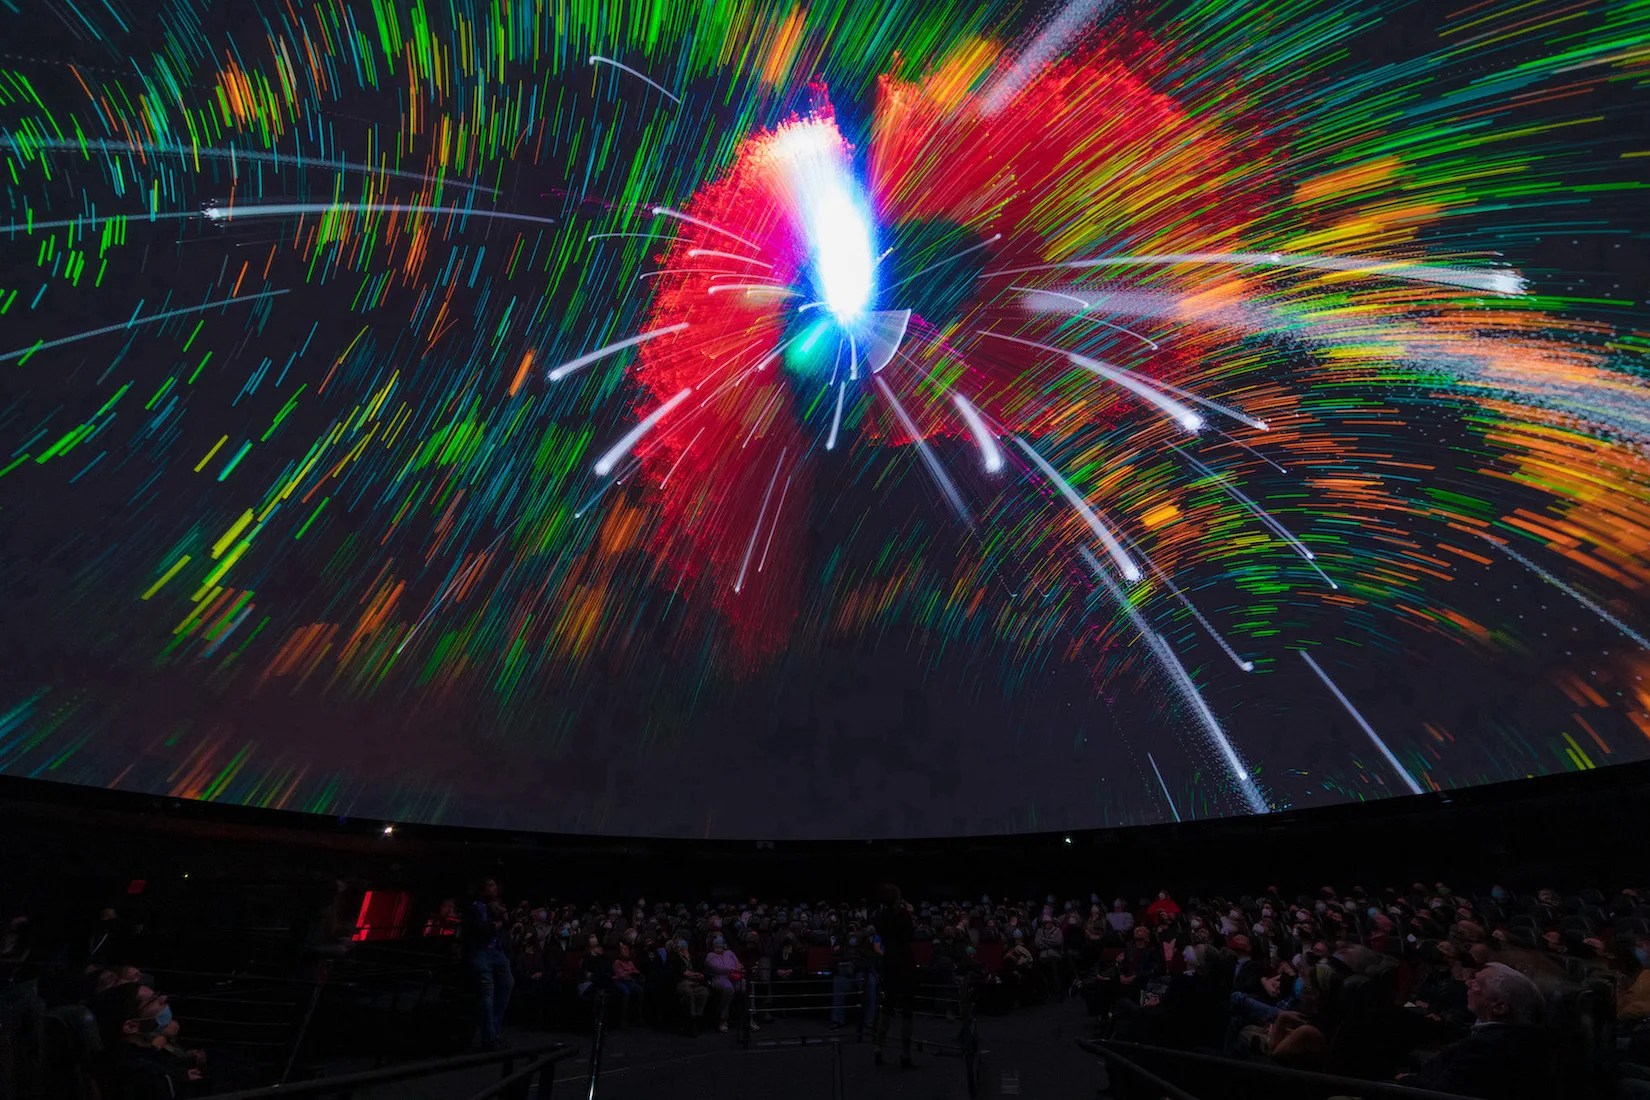 Colored spirals of green, blue and yellow cover the planetarium dome above the audience.